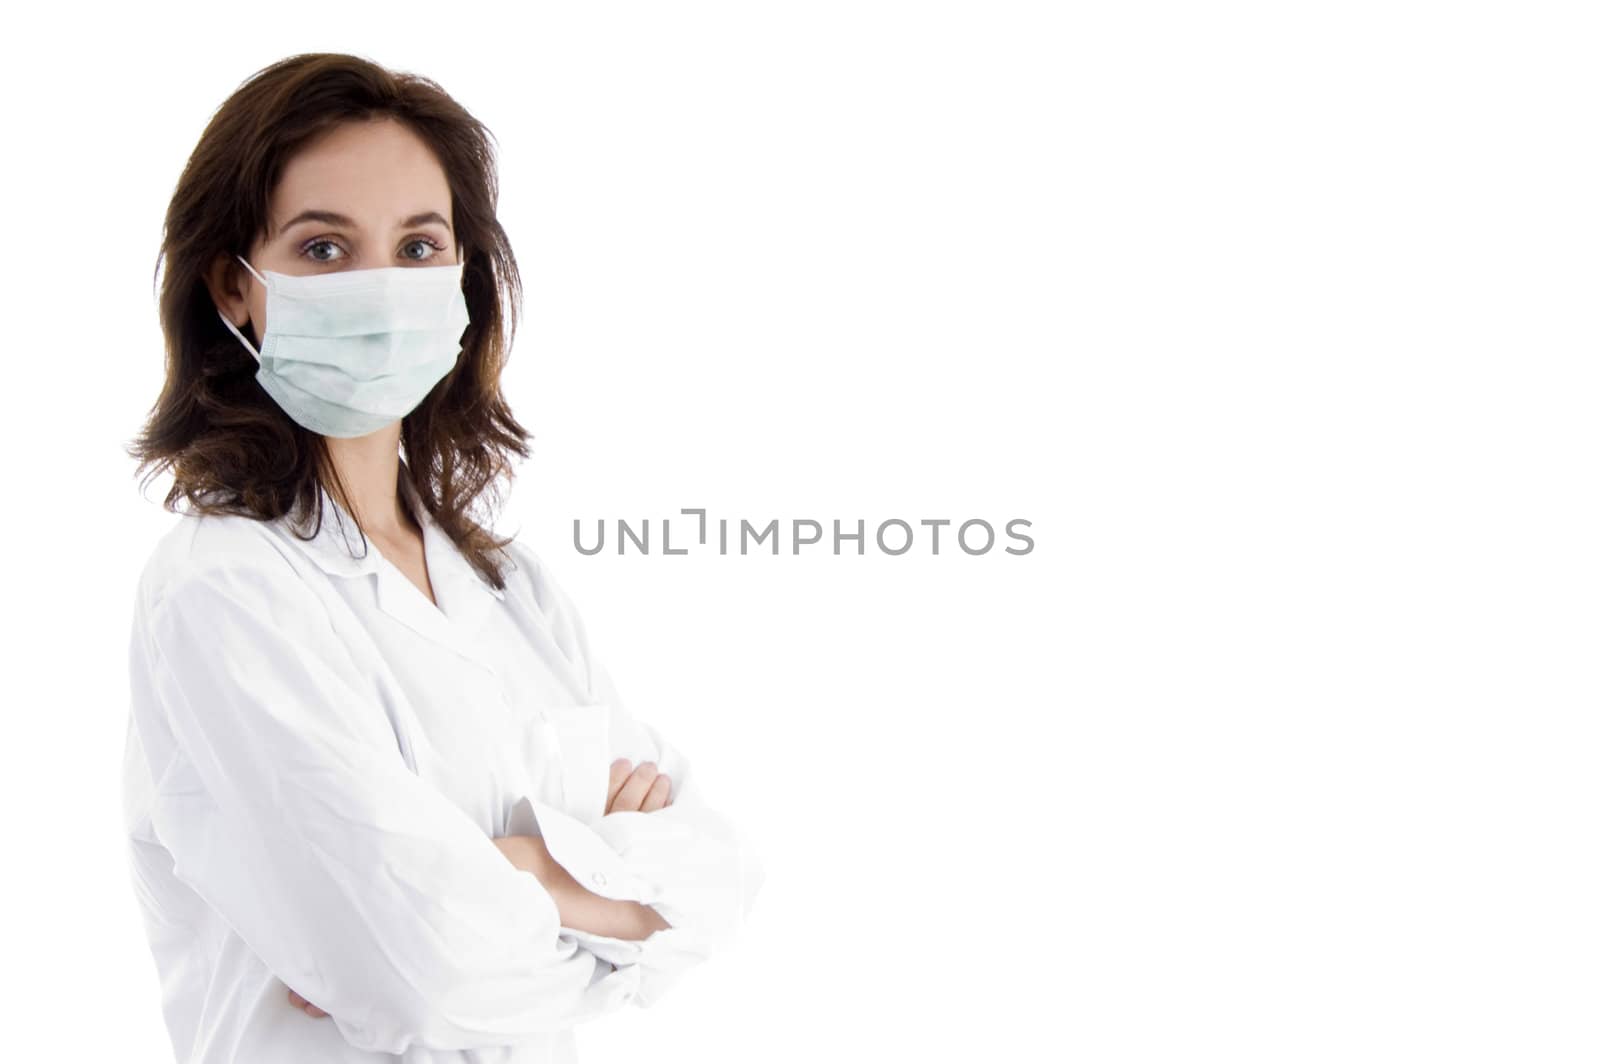 pose of doctor with facemask by imagerymajestic